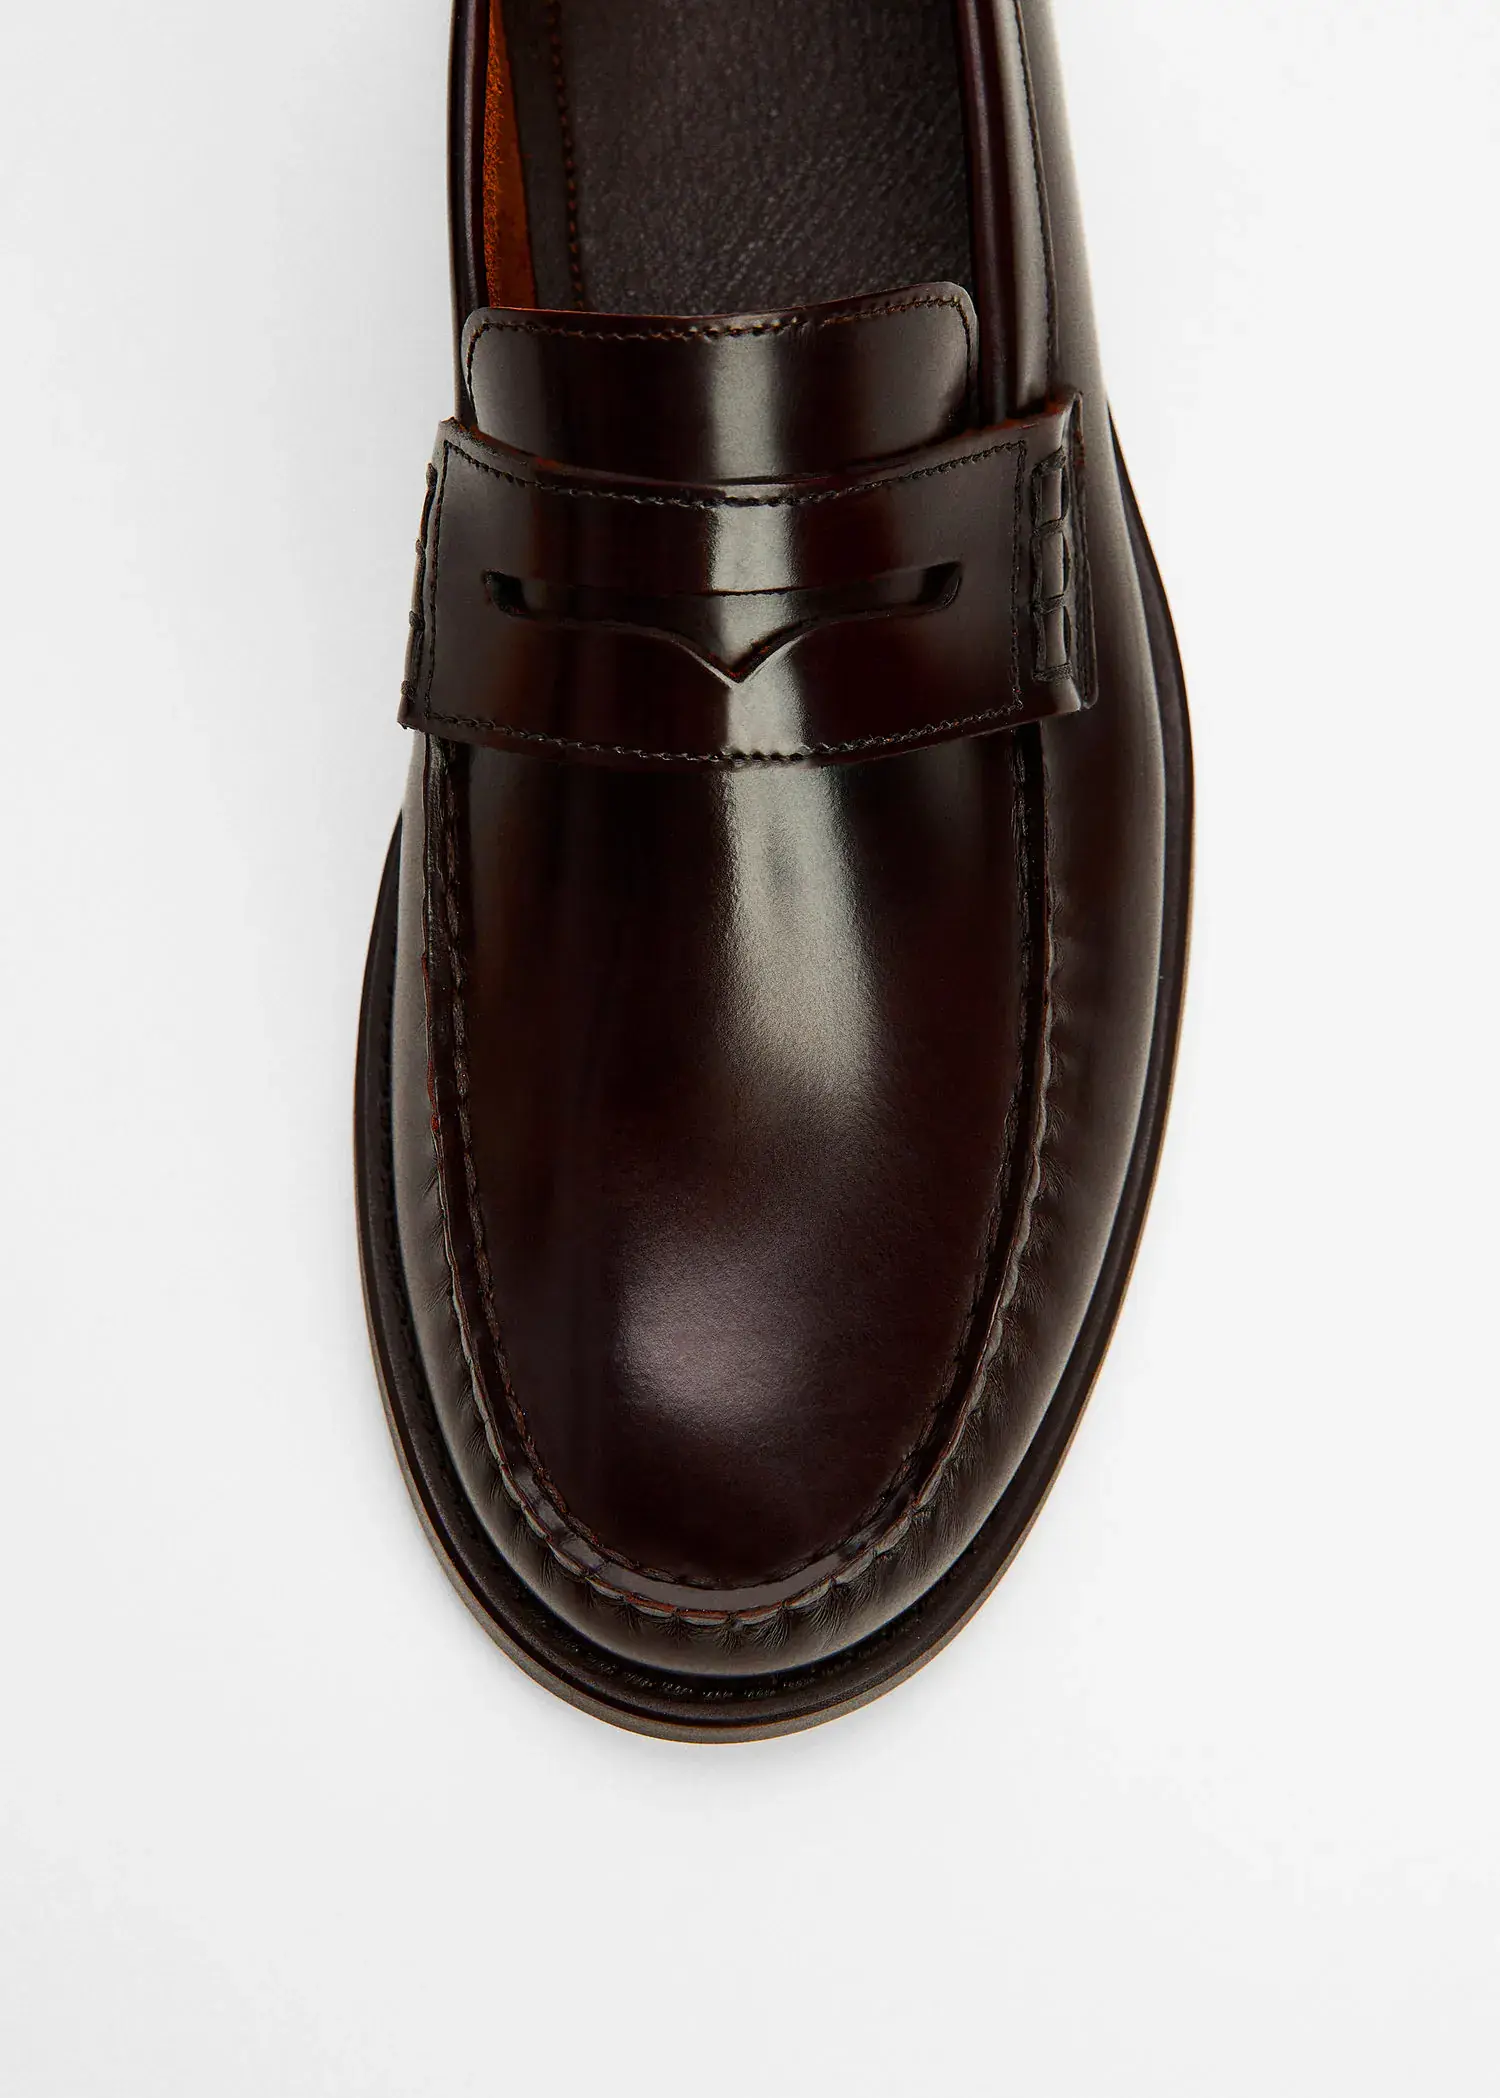 Mango Leather penny loafers. 1